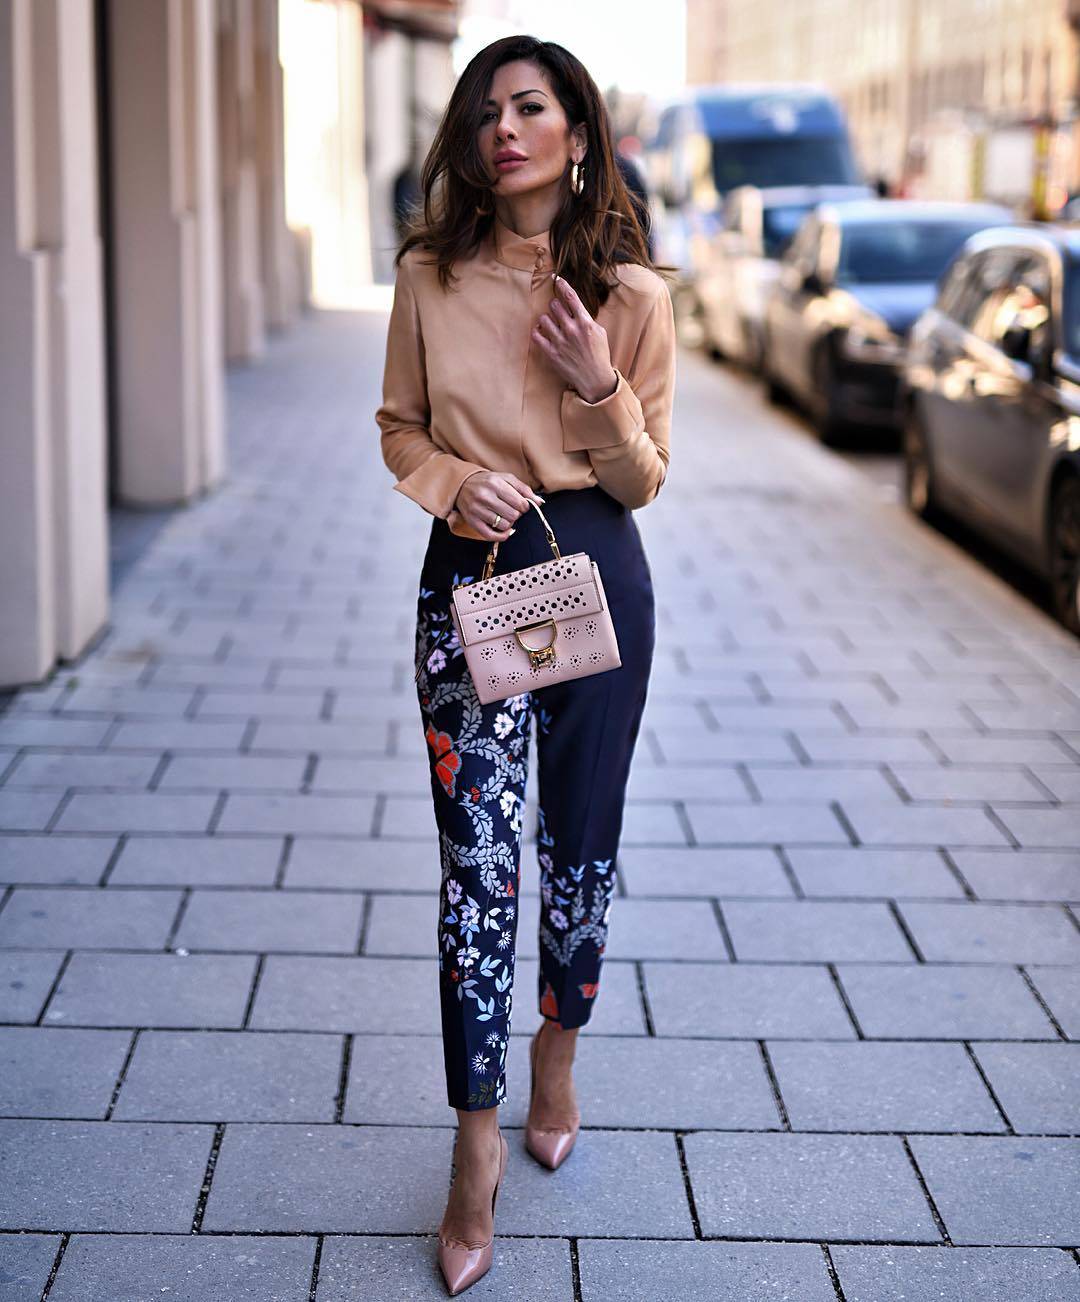 Printed Pant Outfit18 Ideas What to Wear With Printed Pants